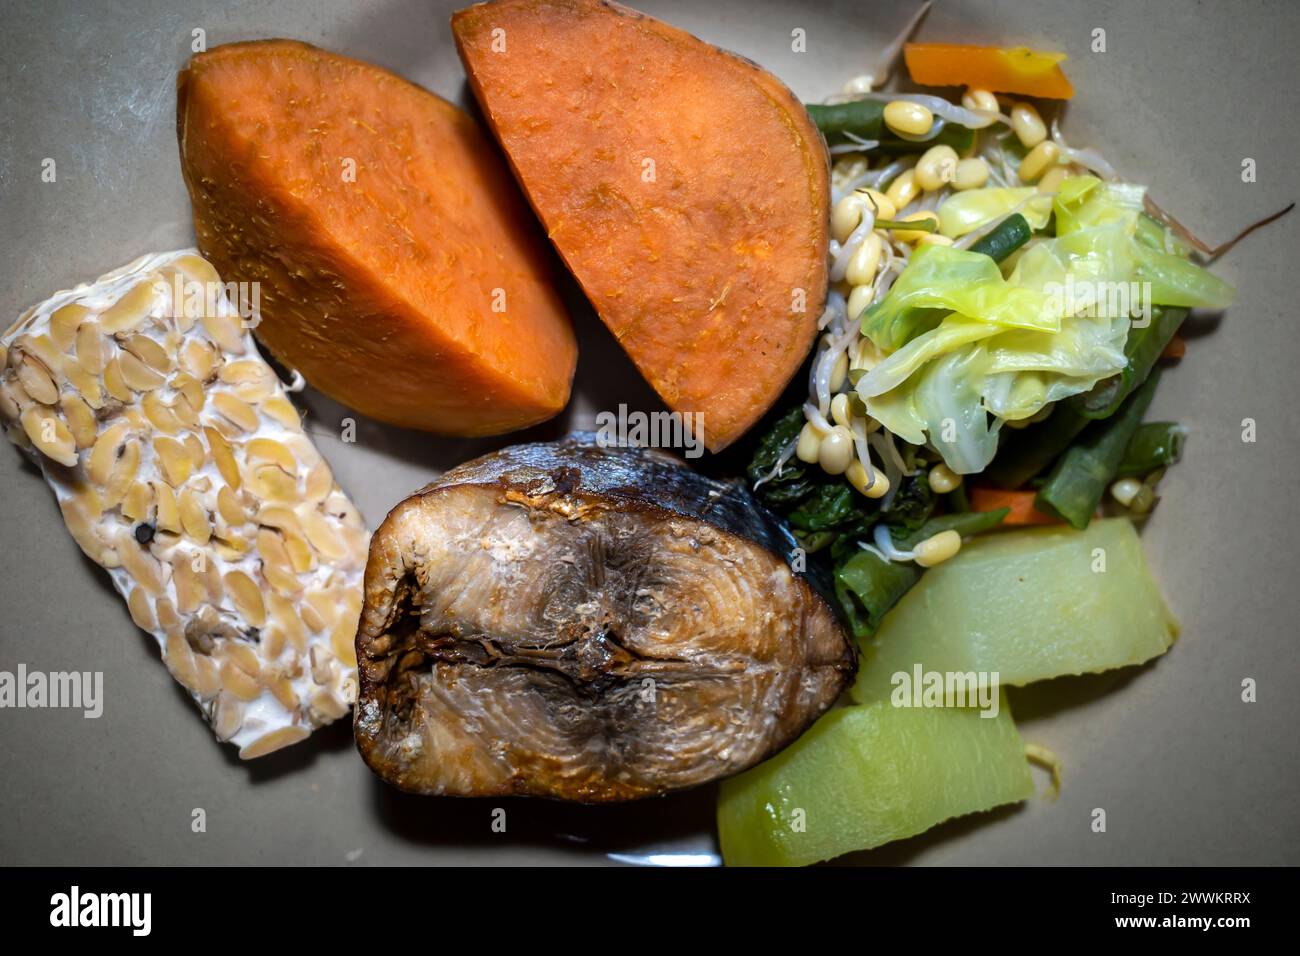 Balanced diet food, healthy diabetic meal concept. Healthy lifestyle low calorie food and low carb diet. Stock Photo